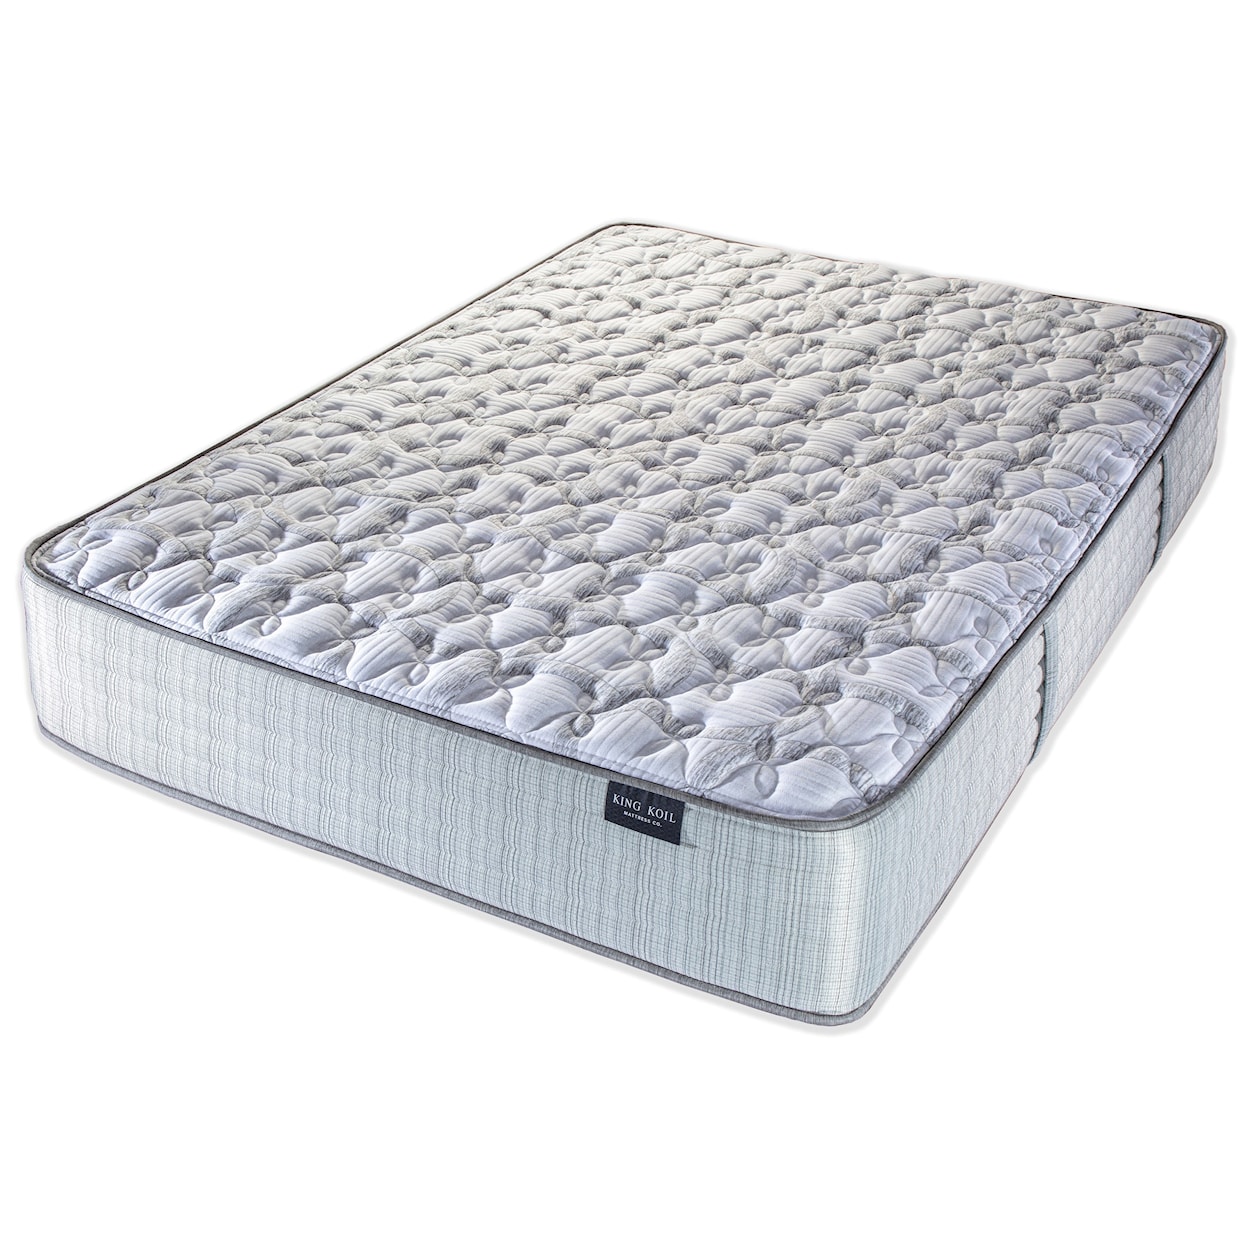 King Koil Harlan Extra Firm Twin 13" Extra Firm Mattress